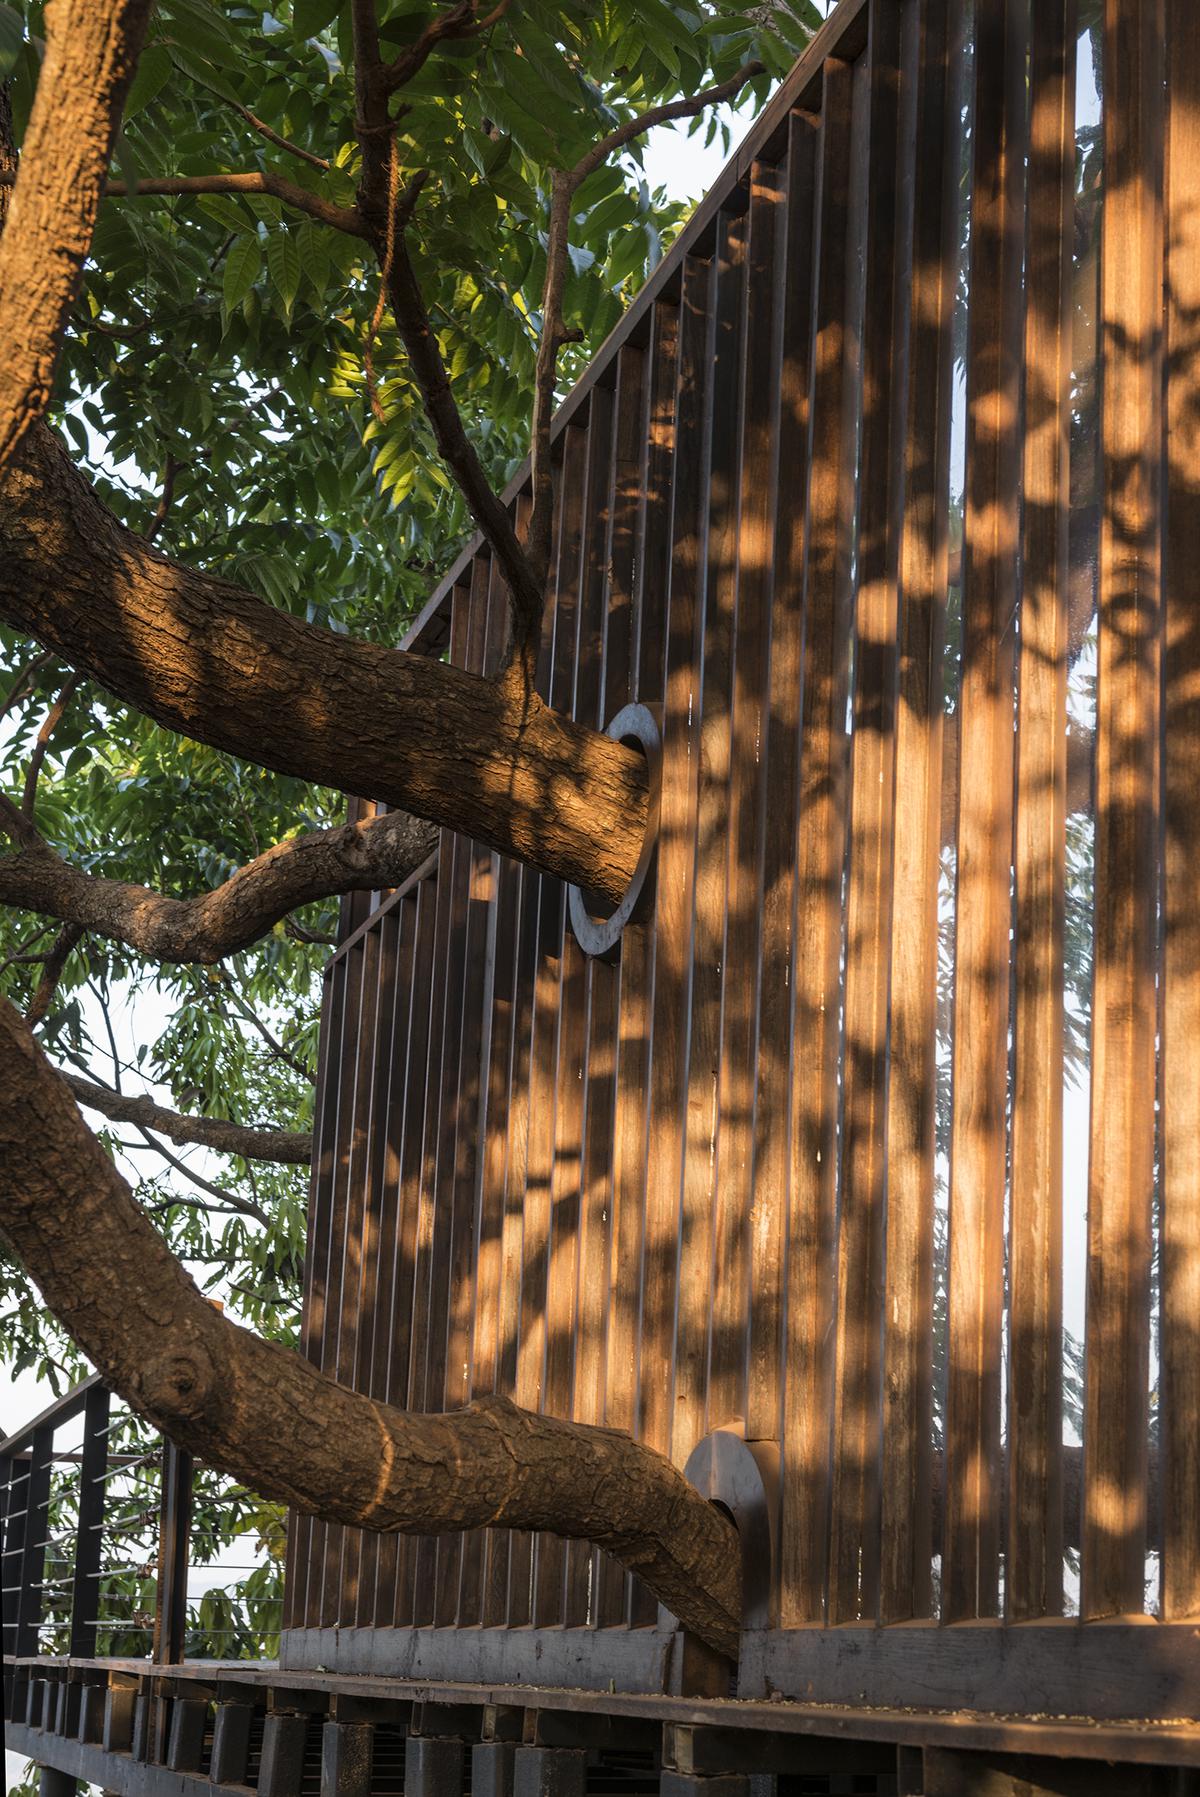 A large stilted deck wraps around Tala Treesort and culminates on a viewing platform.